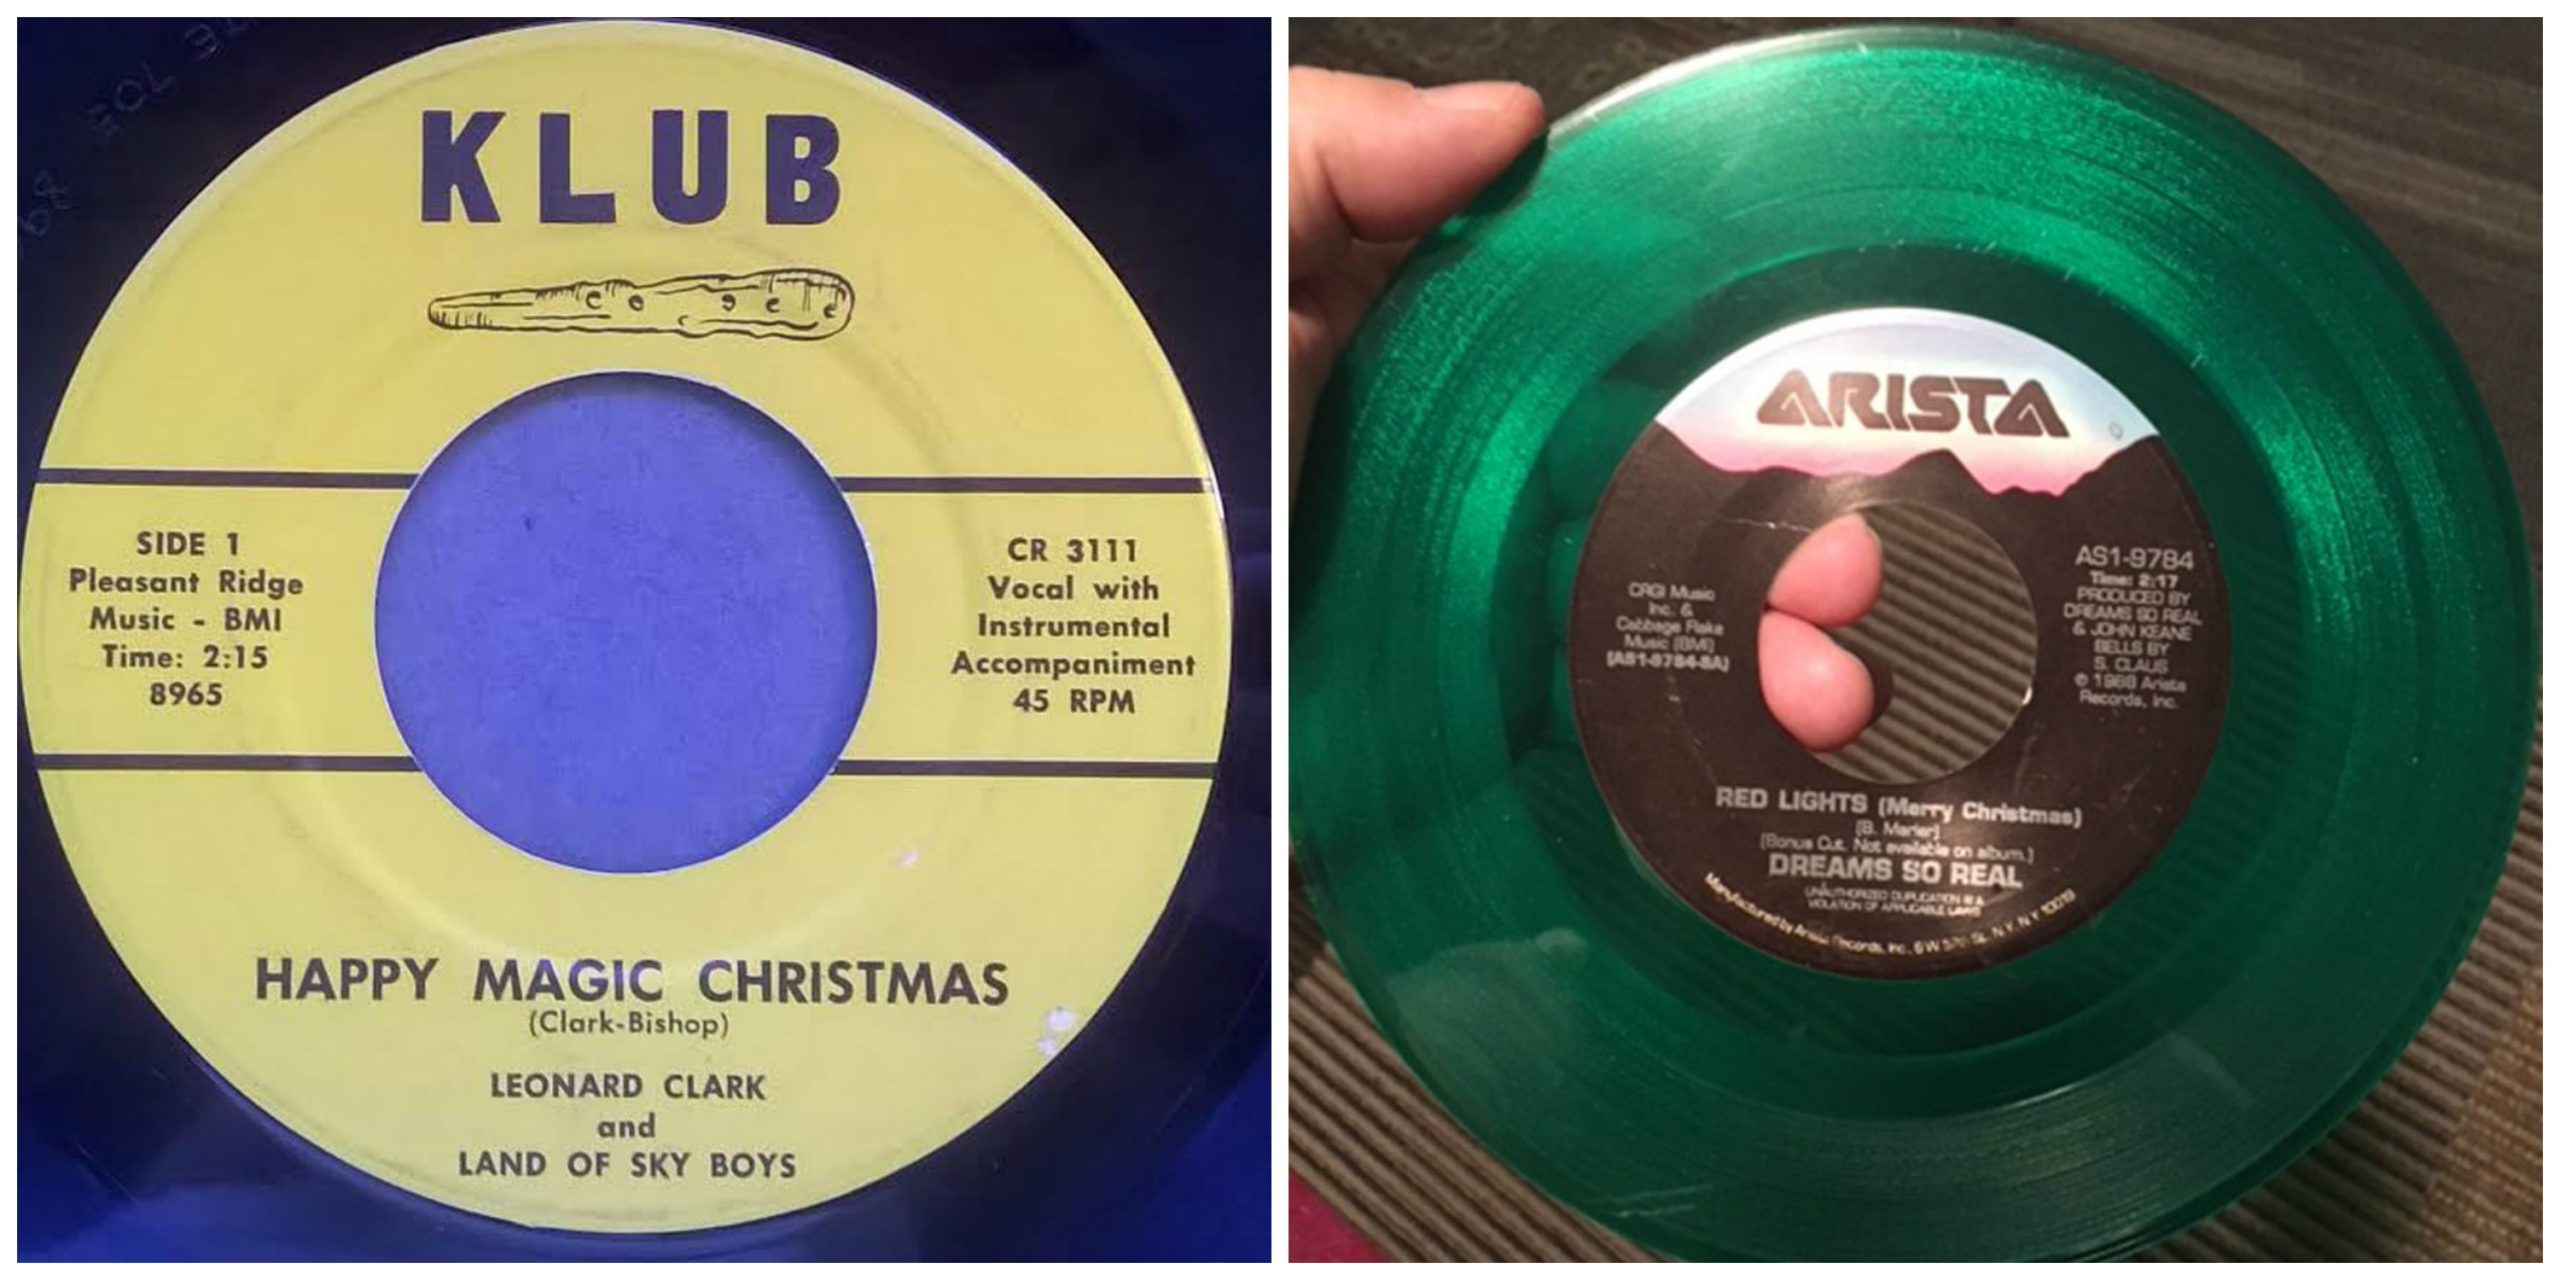 Two photographs of records: "Happy Magic Christmas" and "Red Lights (Merry Christmas)"